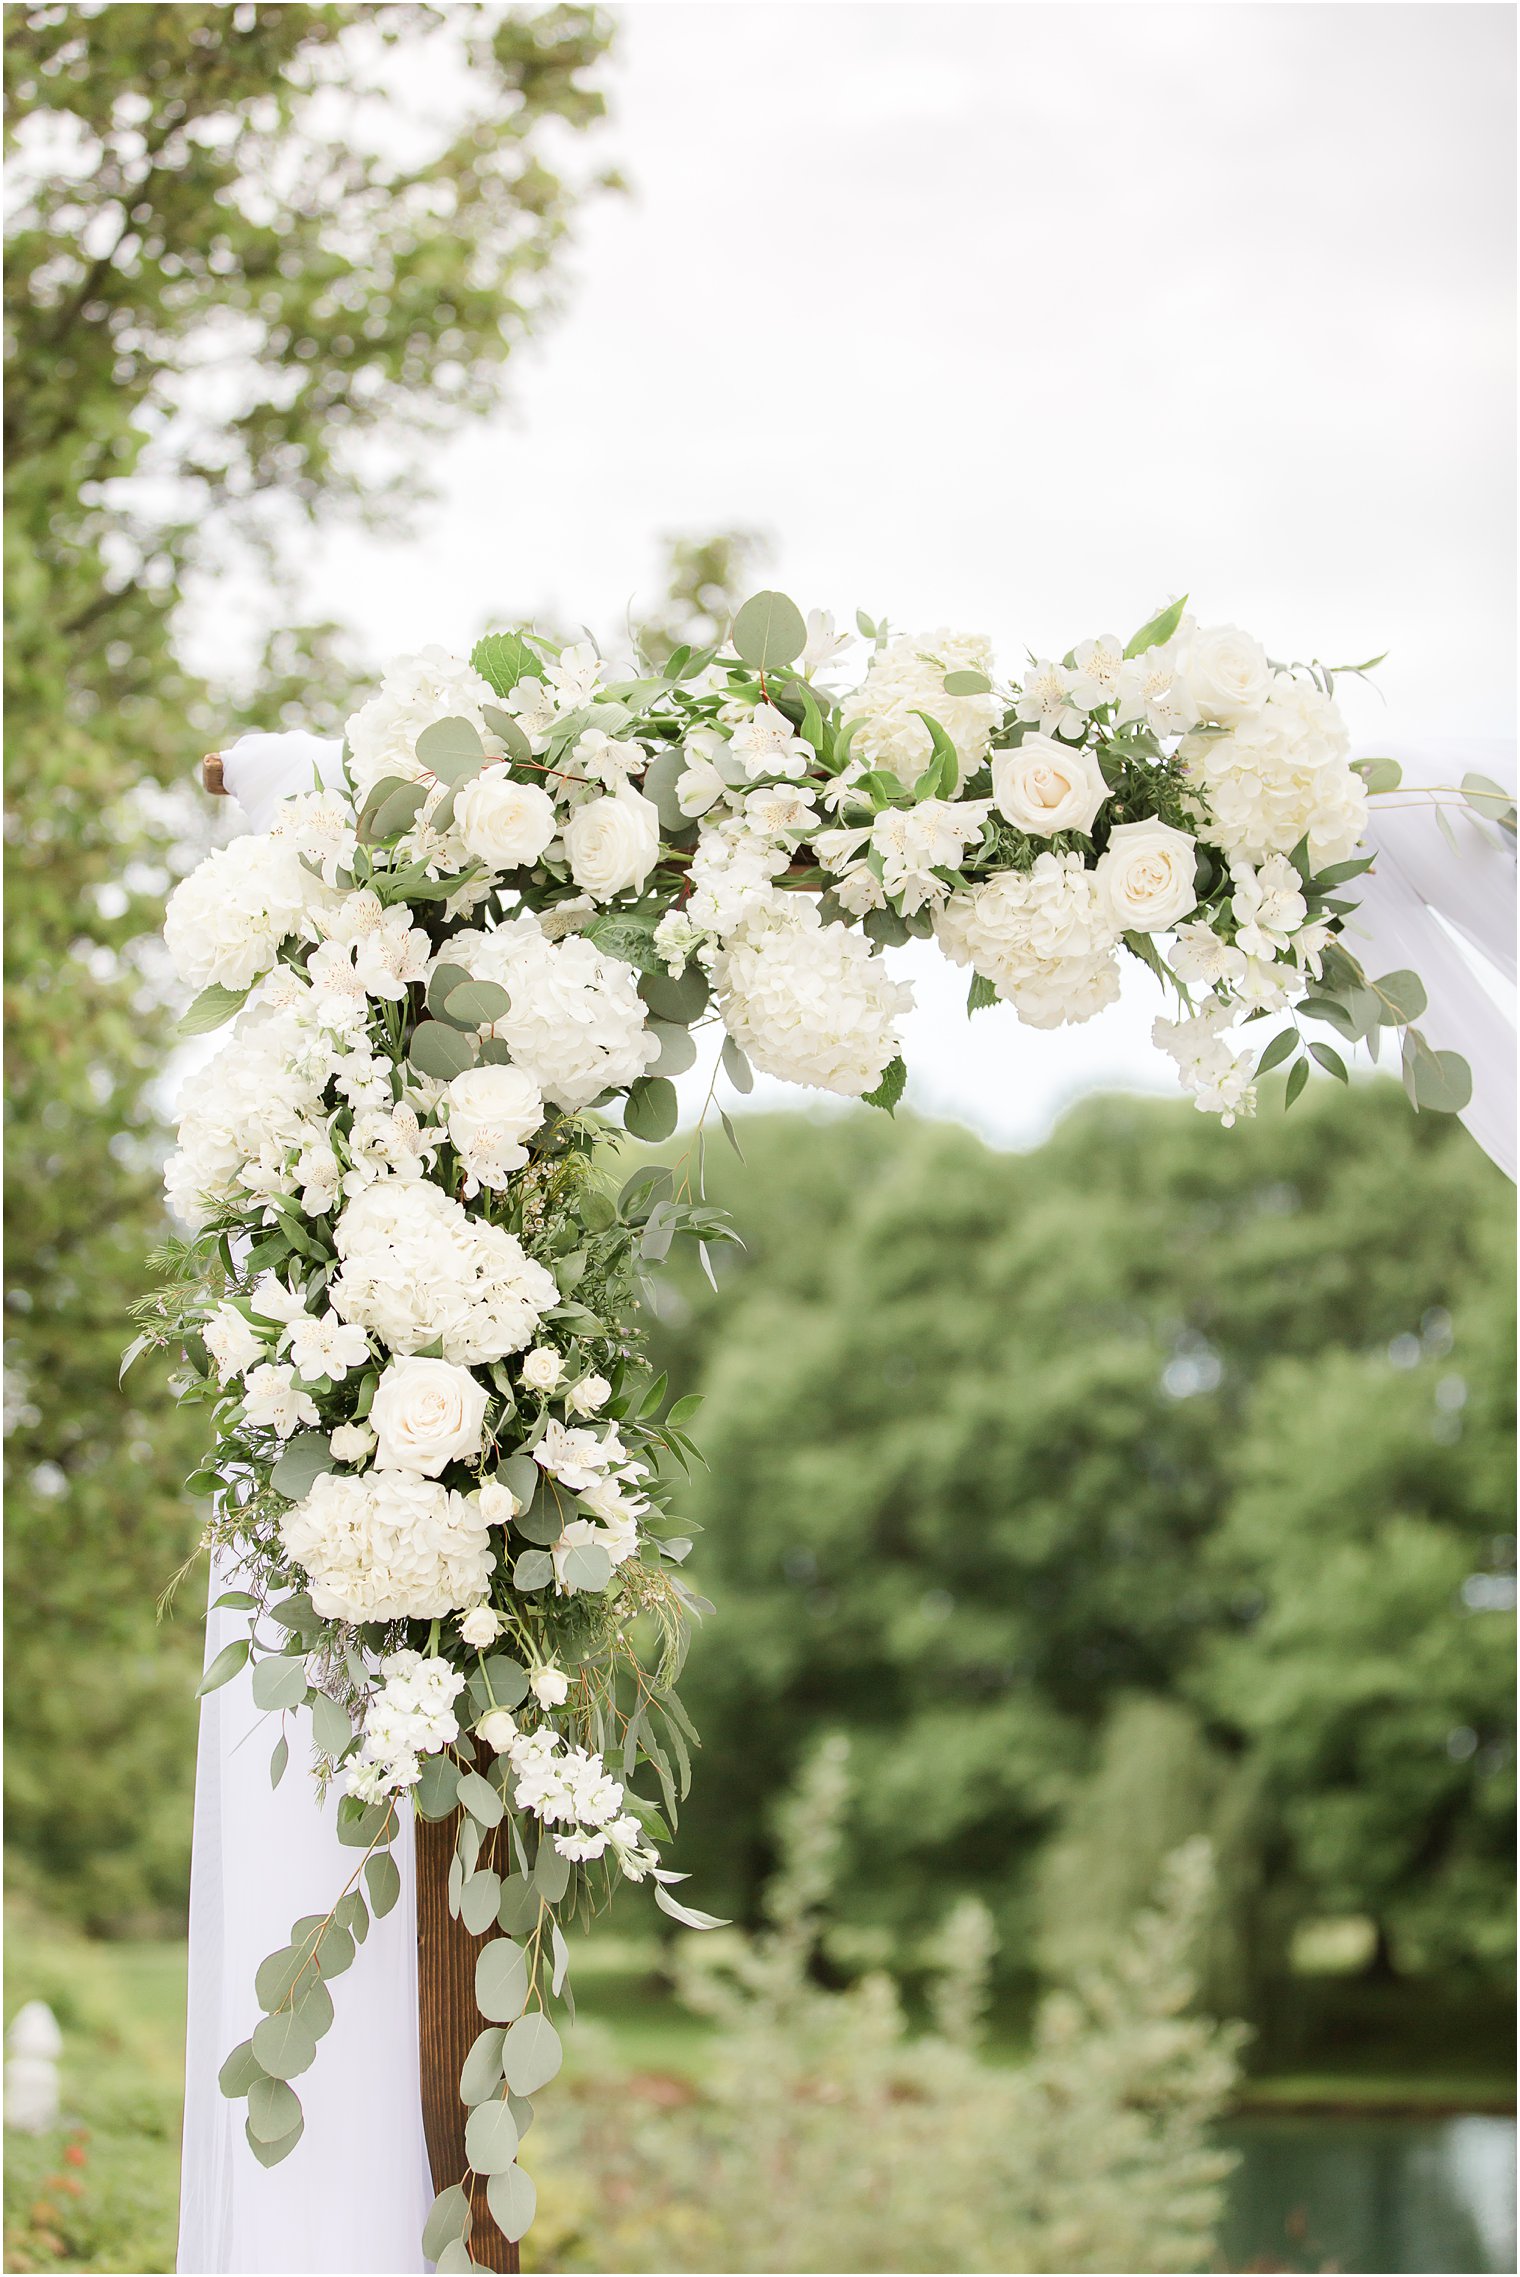 Wedding florals at Windows on the Water at Frogbridge Wedding | Florals by Bespoke Floral and Design